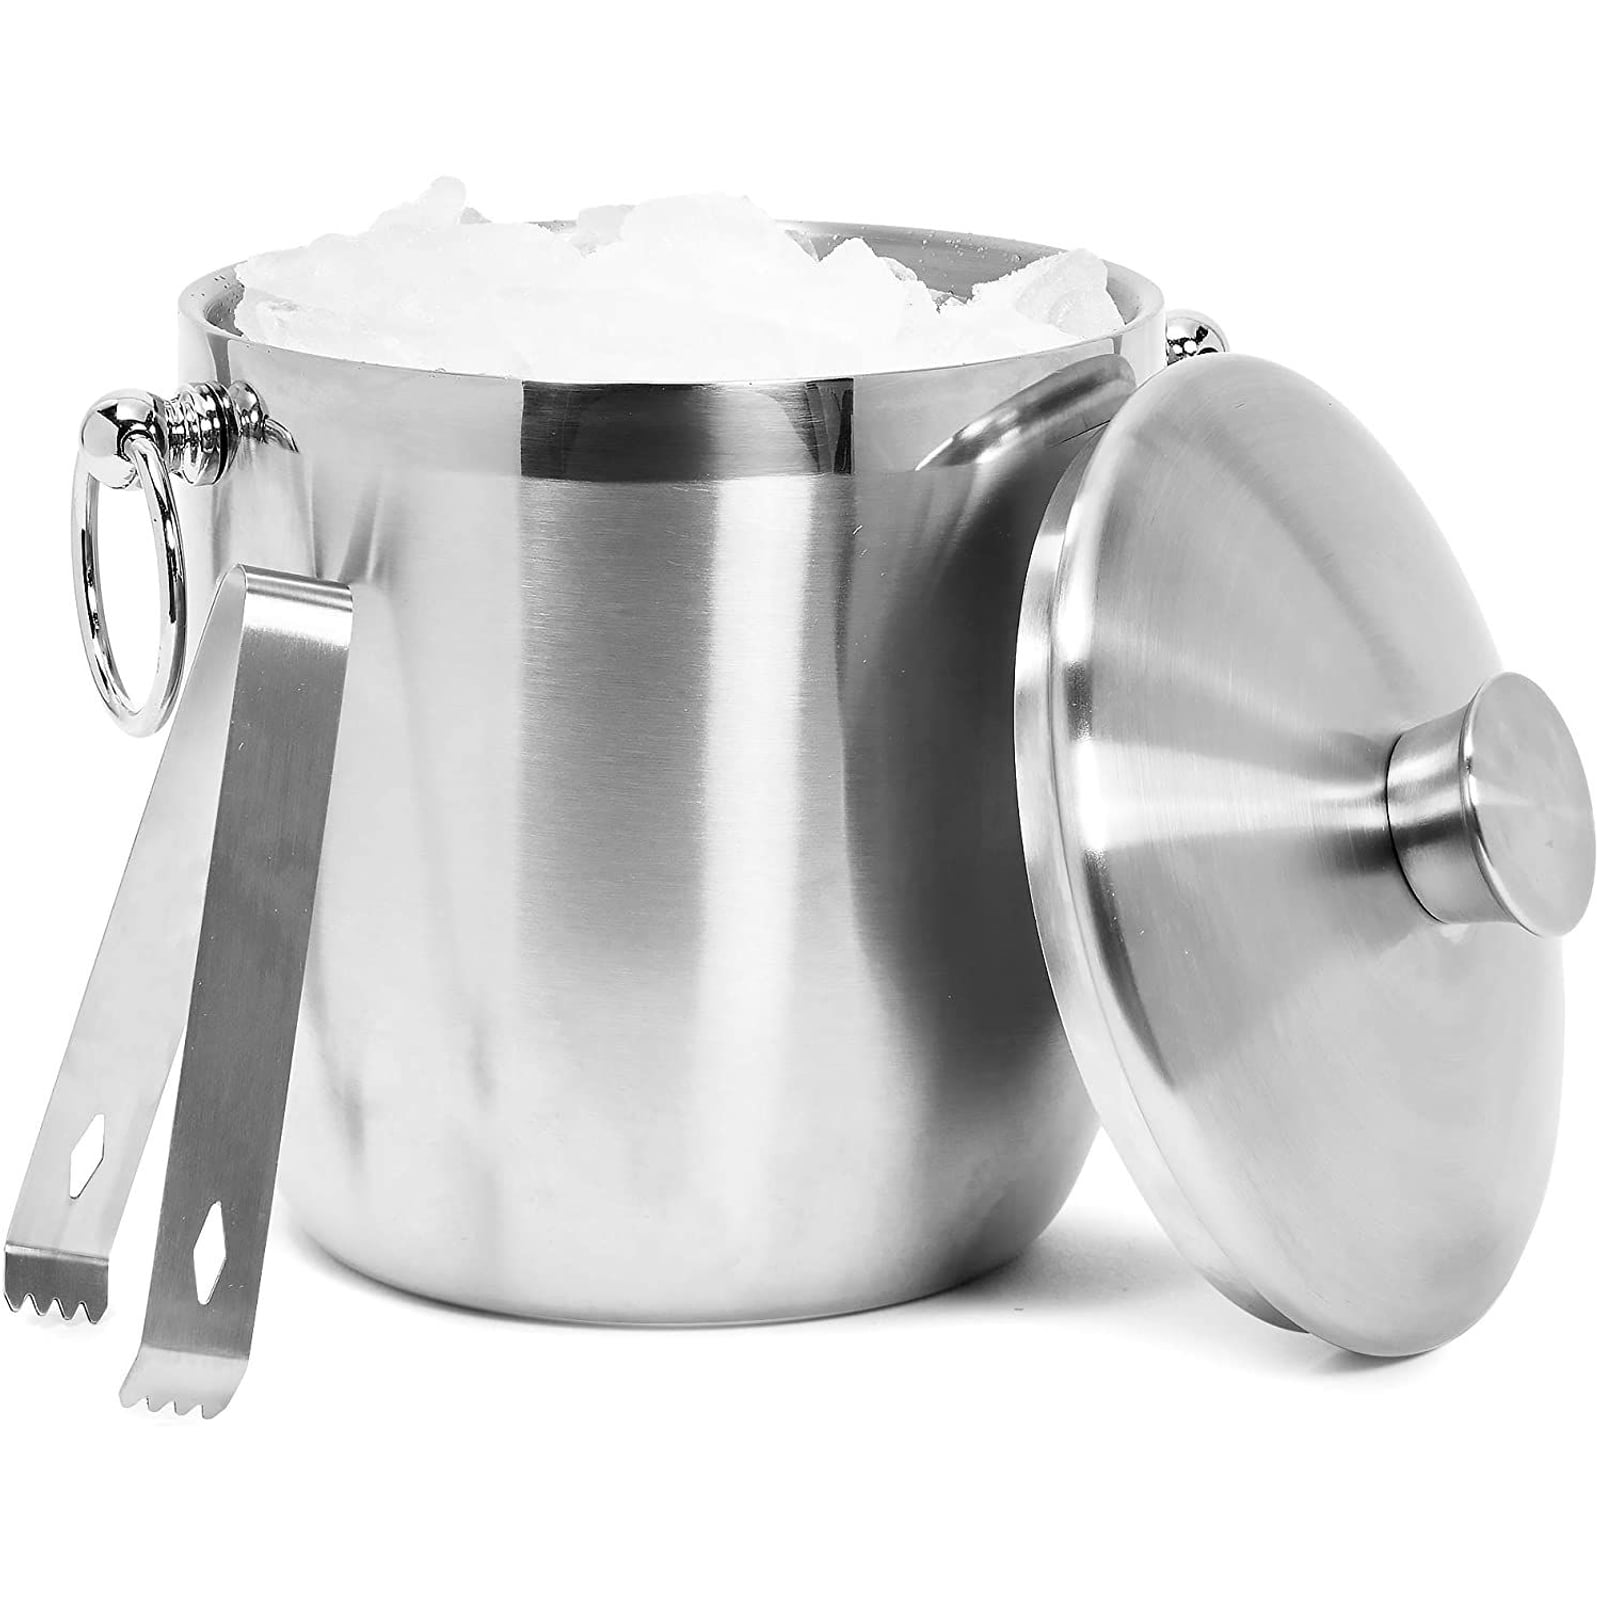 Details about   Homdox Ice Bucket Stainless Steel Ice Buckets Tongs,Double Wall Insulated Silver 